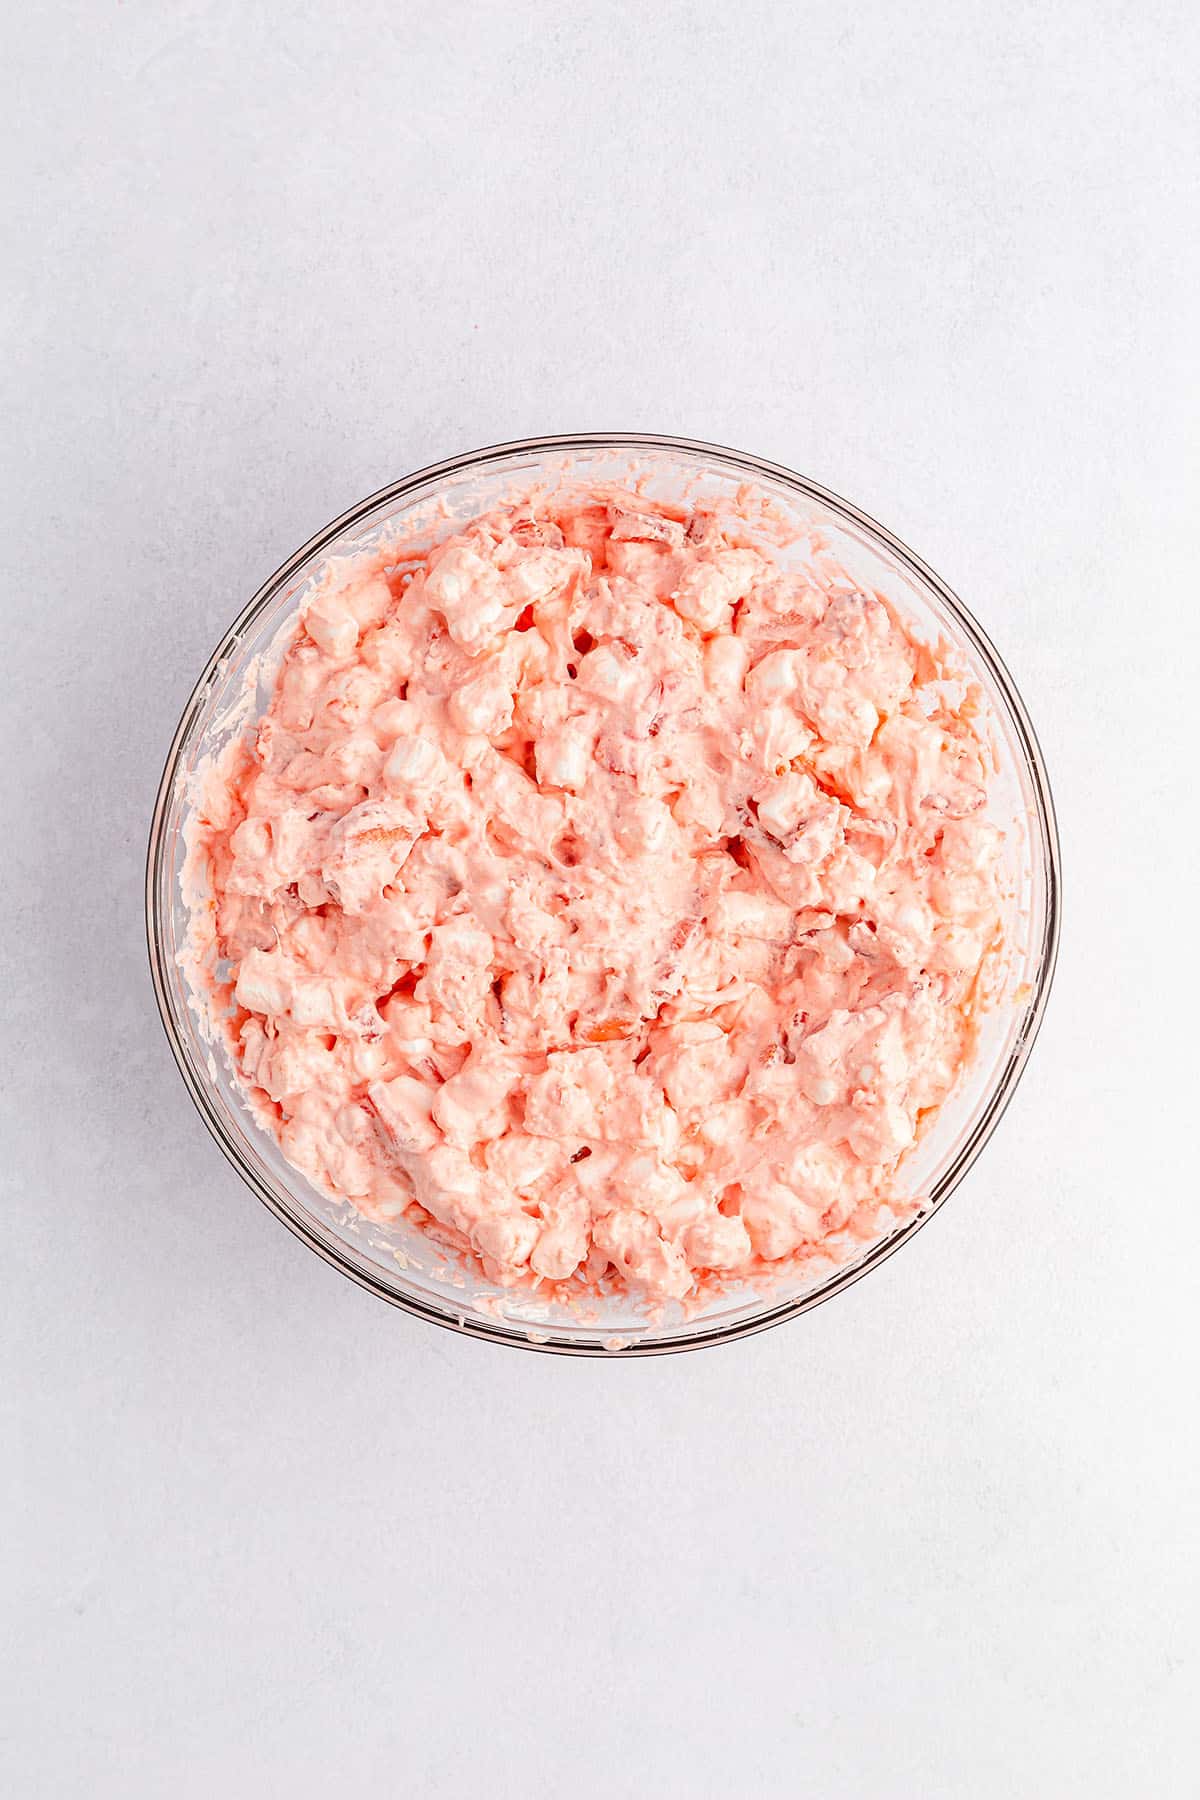 Combined ingredients of strawberry fluff salad in a mixing bowl